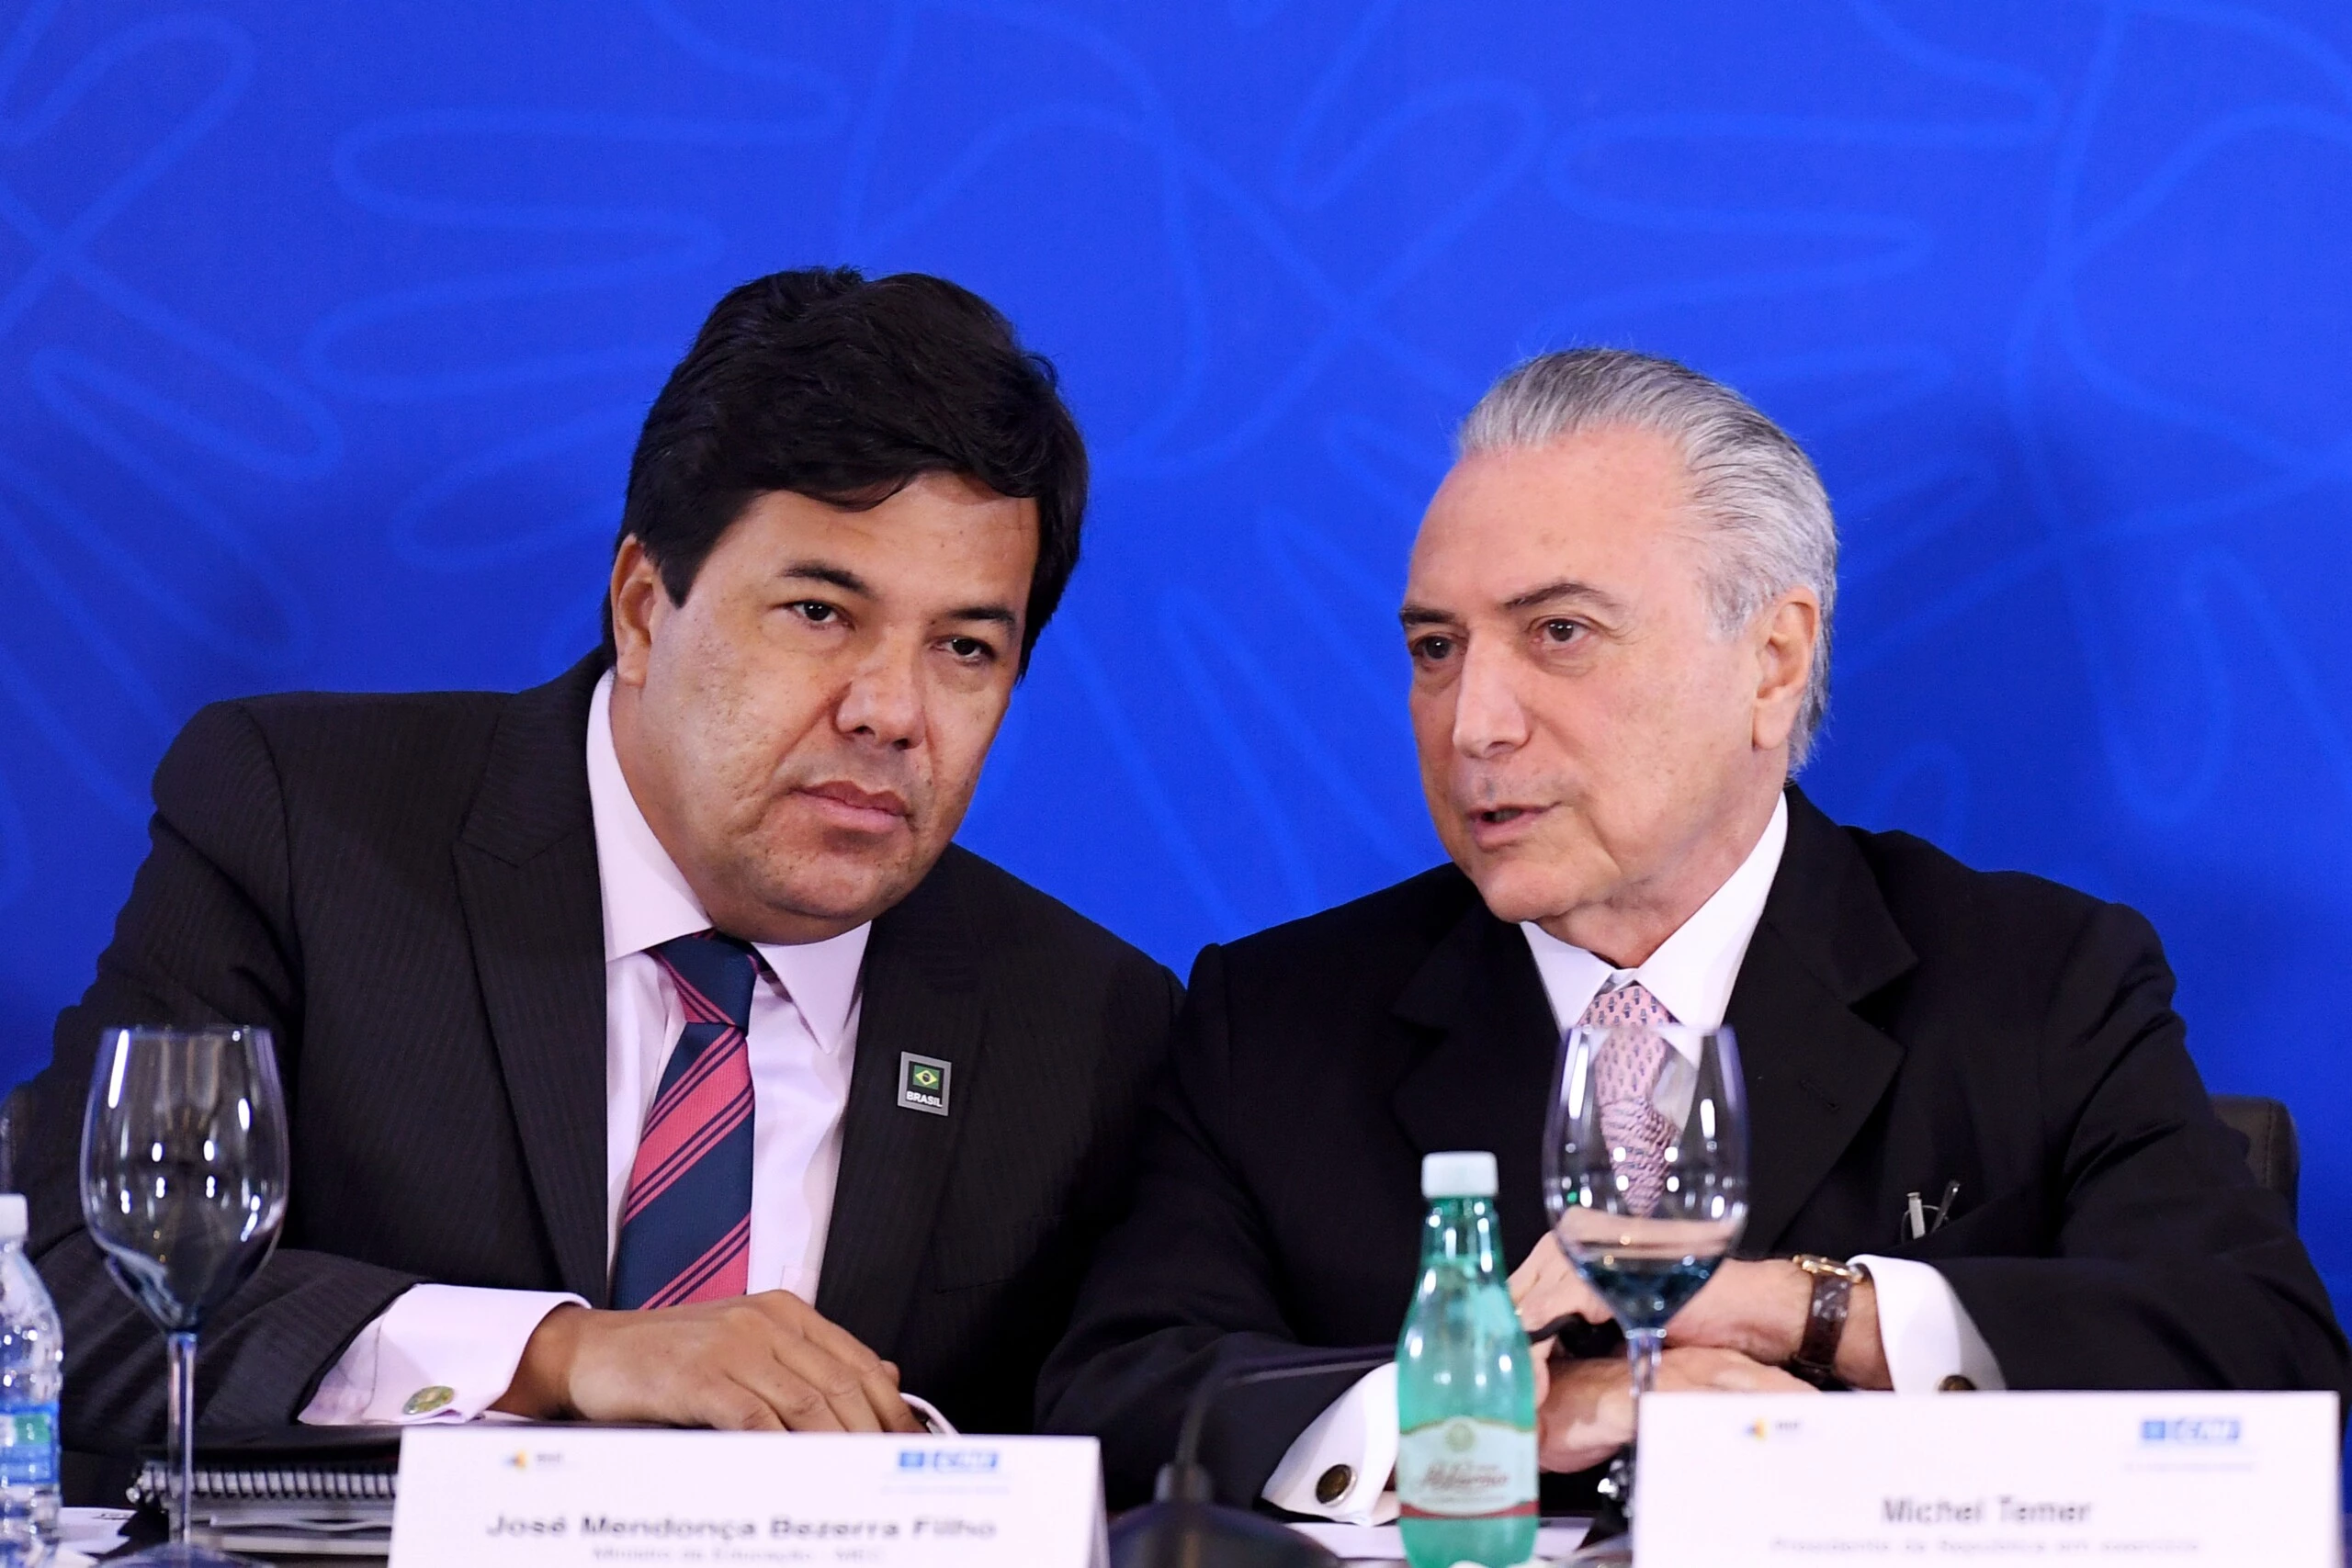 Brazilian acting President Michel Temer (R) speaks with his Education Minister Jose Mendonca Filho during a meeting with the Business Leaders Mobilization for Innovation Committee at the National Industry Confederation building in Brasilia on July 8, 2016. / AFP / EVARISTO SA        (Photo credit should read EVARISTO SA/AFP/Getty Images)